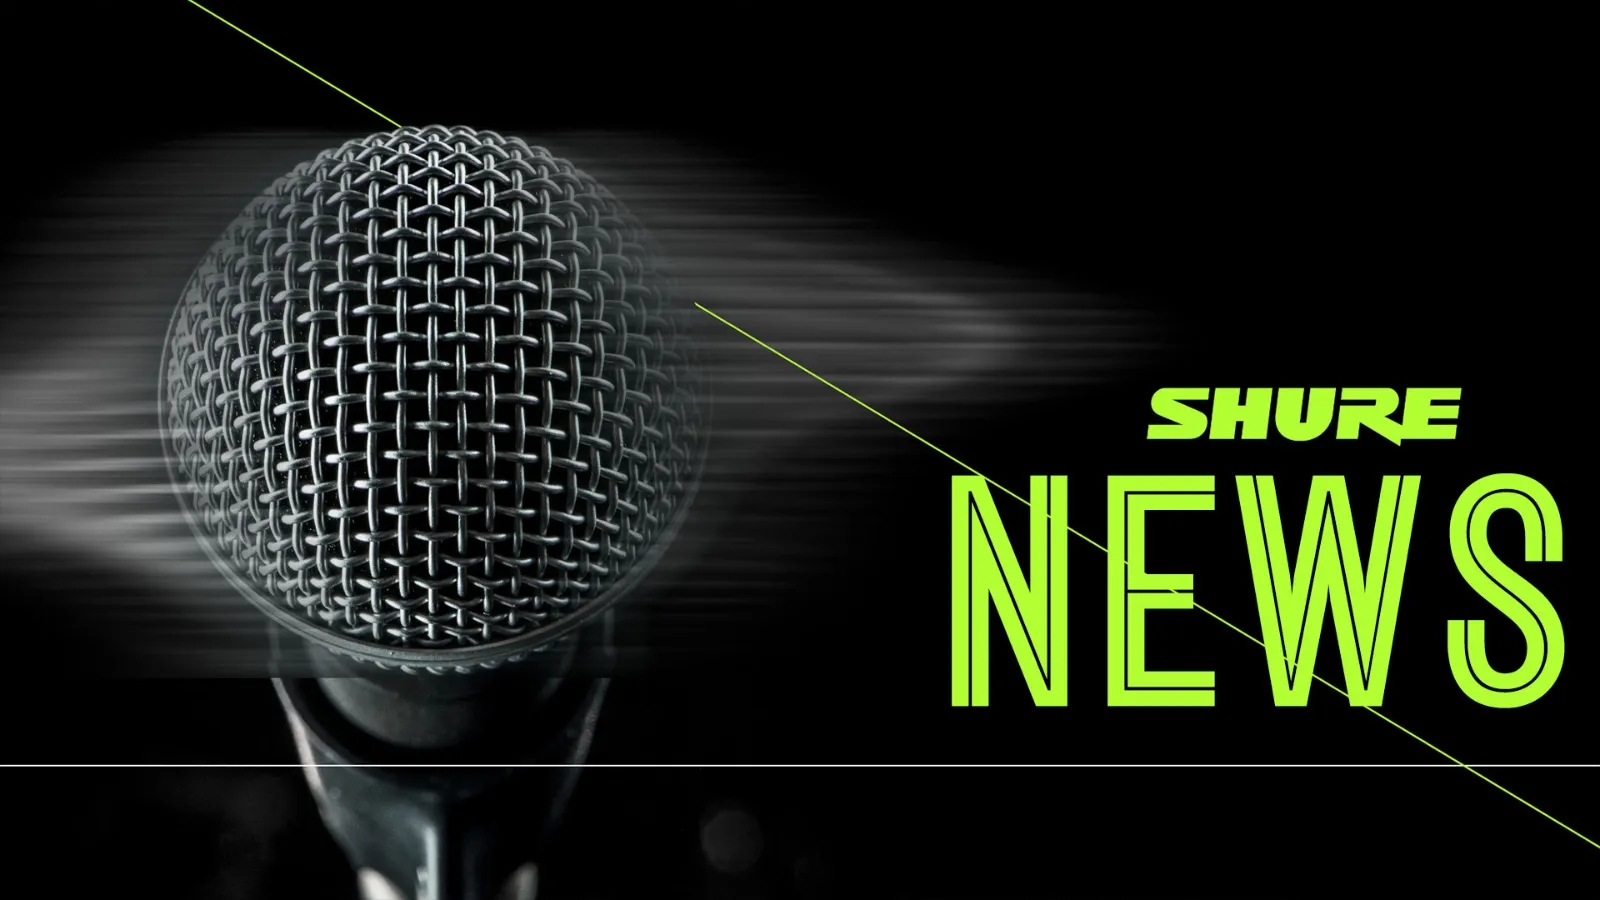 Shure News logo with SM58 Microphone